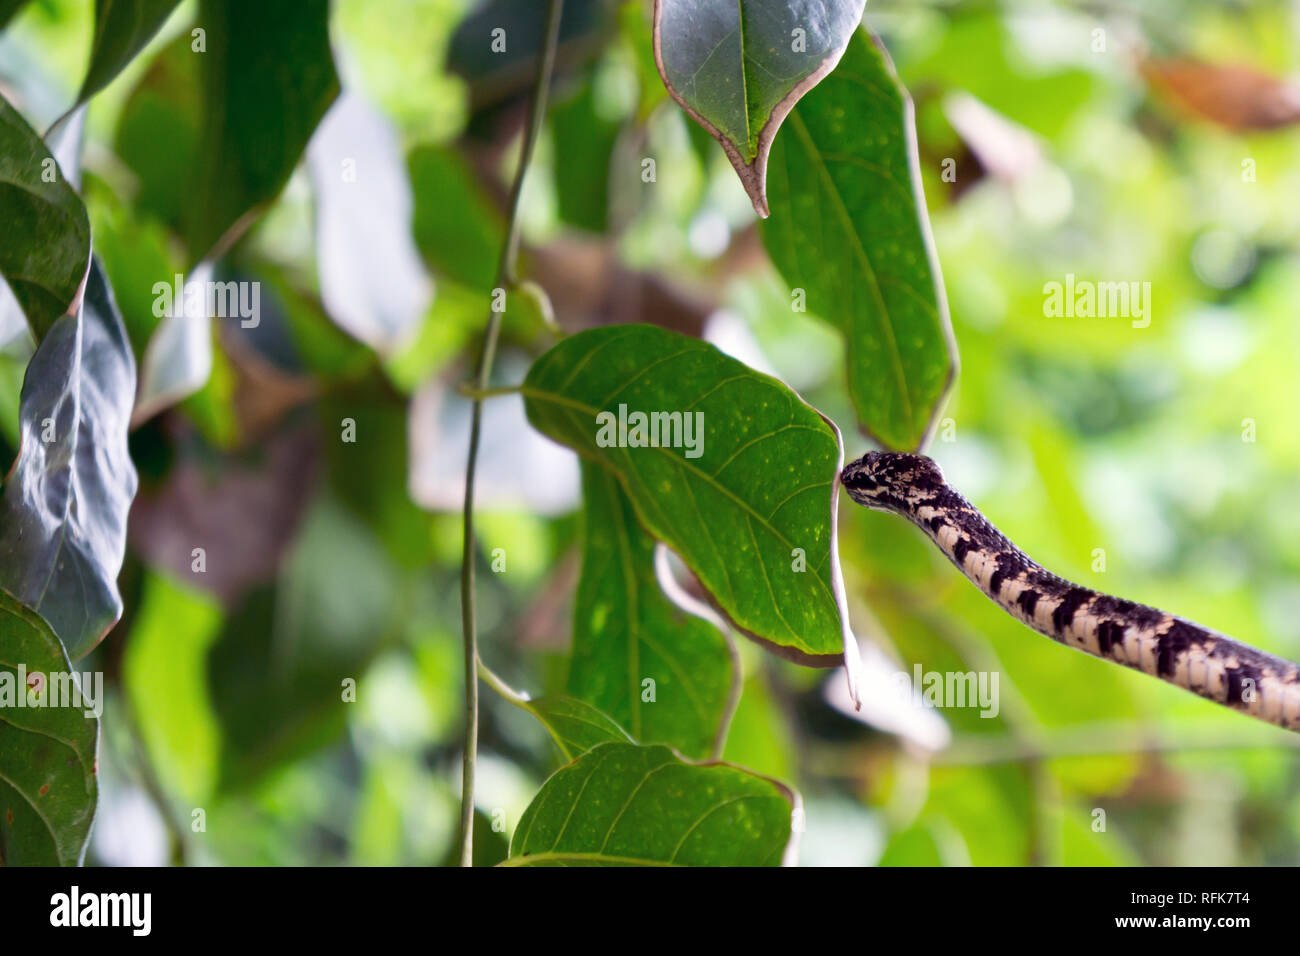 Cloudy Snail Eating Snake in Tree Branch - Dominical, Puntarenas, Costa Rica Stock Photo